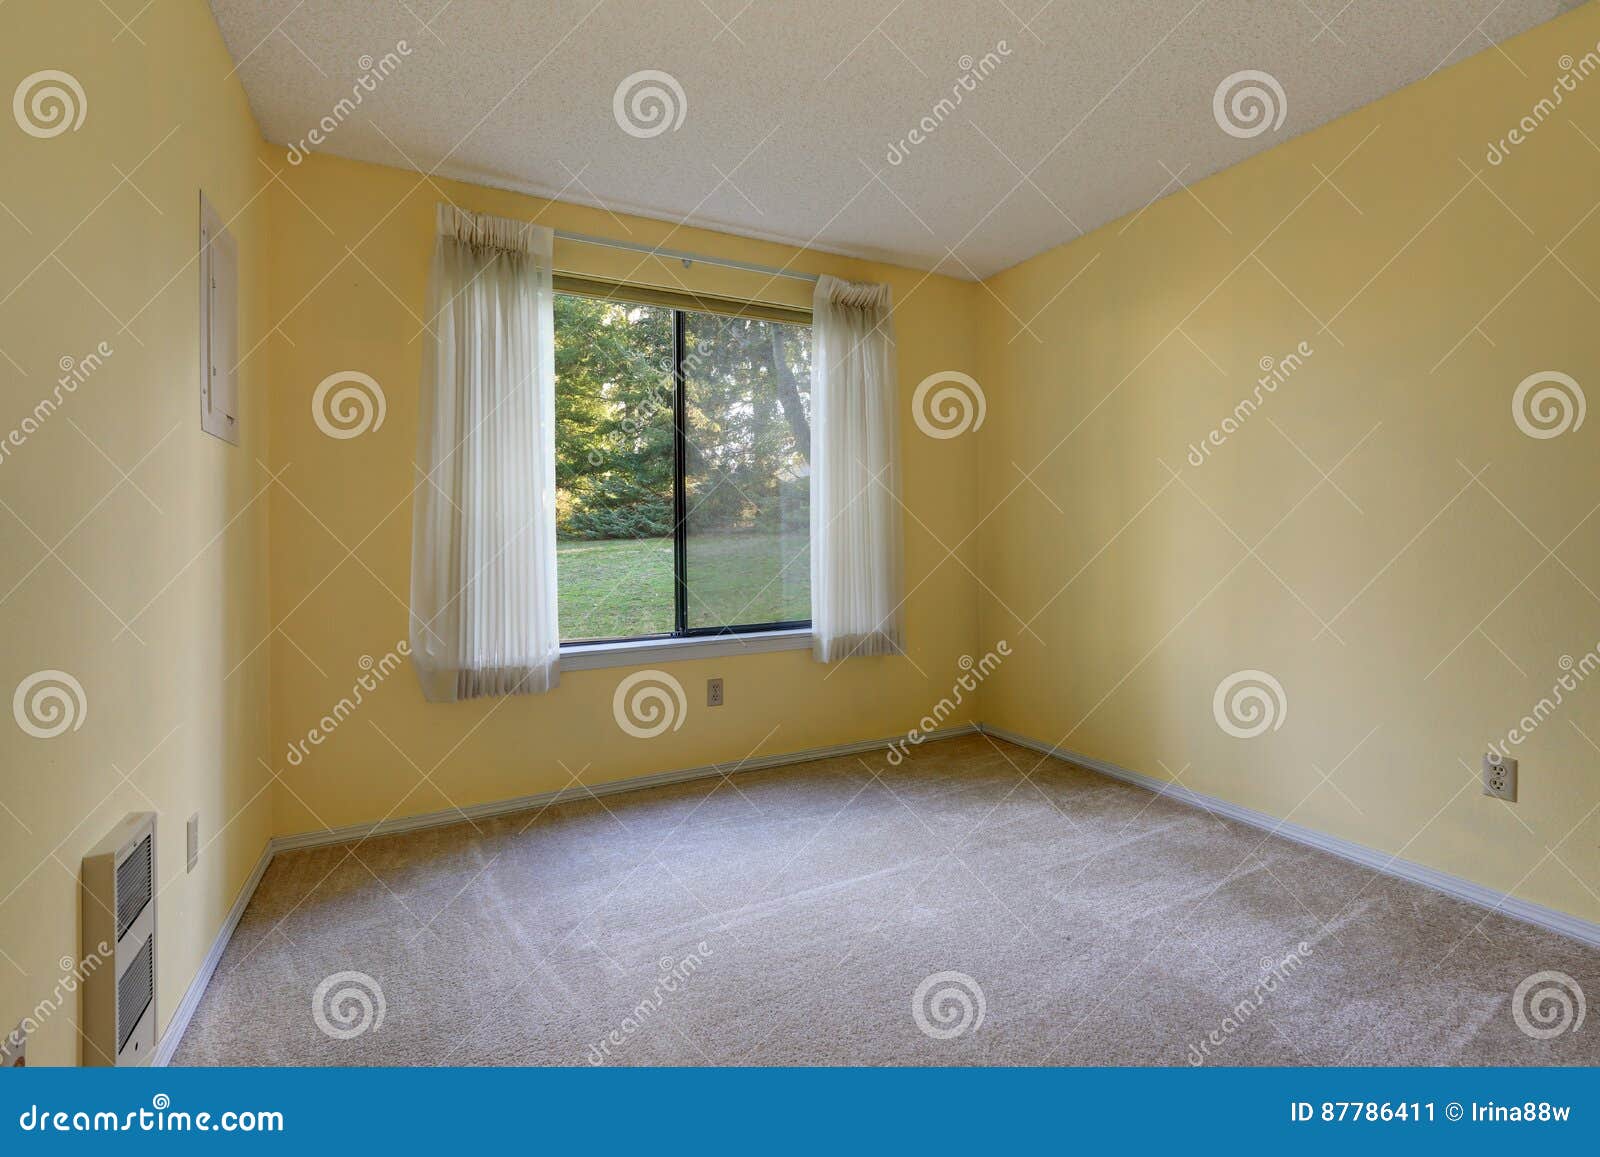 Empty Yellow Room With Wall To Wall Carpet Floor Stock Image